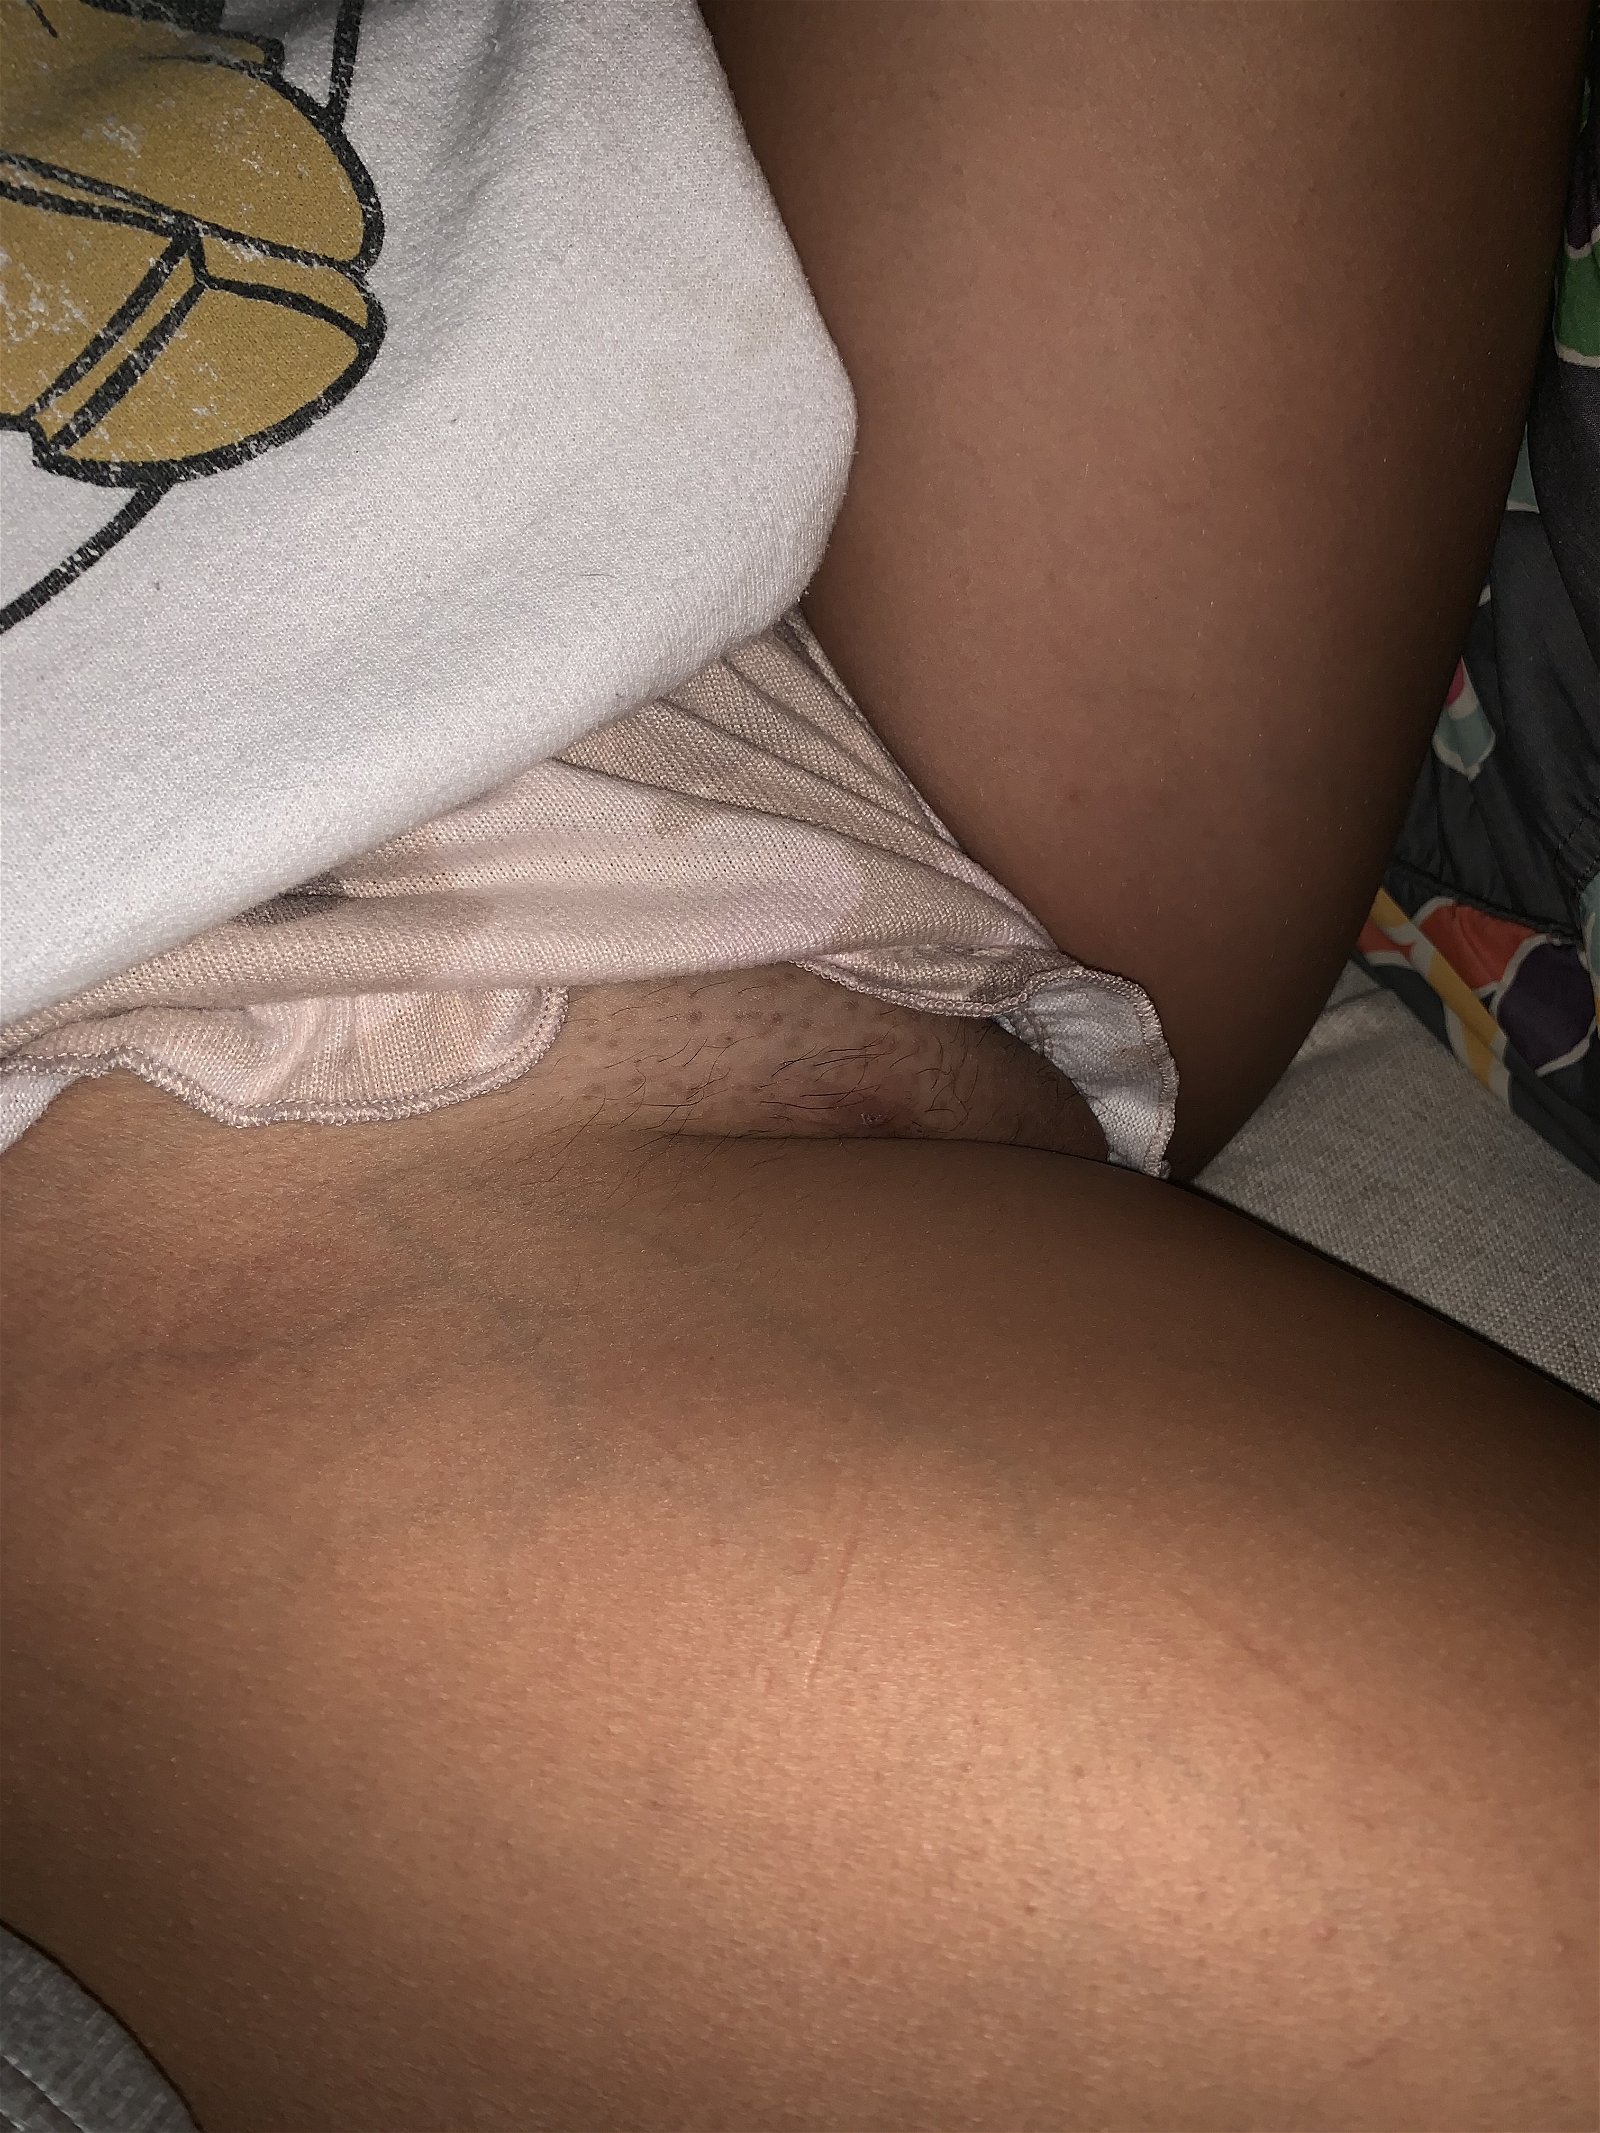 Photo by Nilegoddess with the username @Nilegoddess, who is a star user,  July 15, 2019 at 9:57 AM. The post is about the topic Amateurs and the text says 'Letting it hang out a bit'